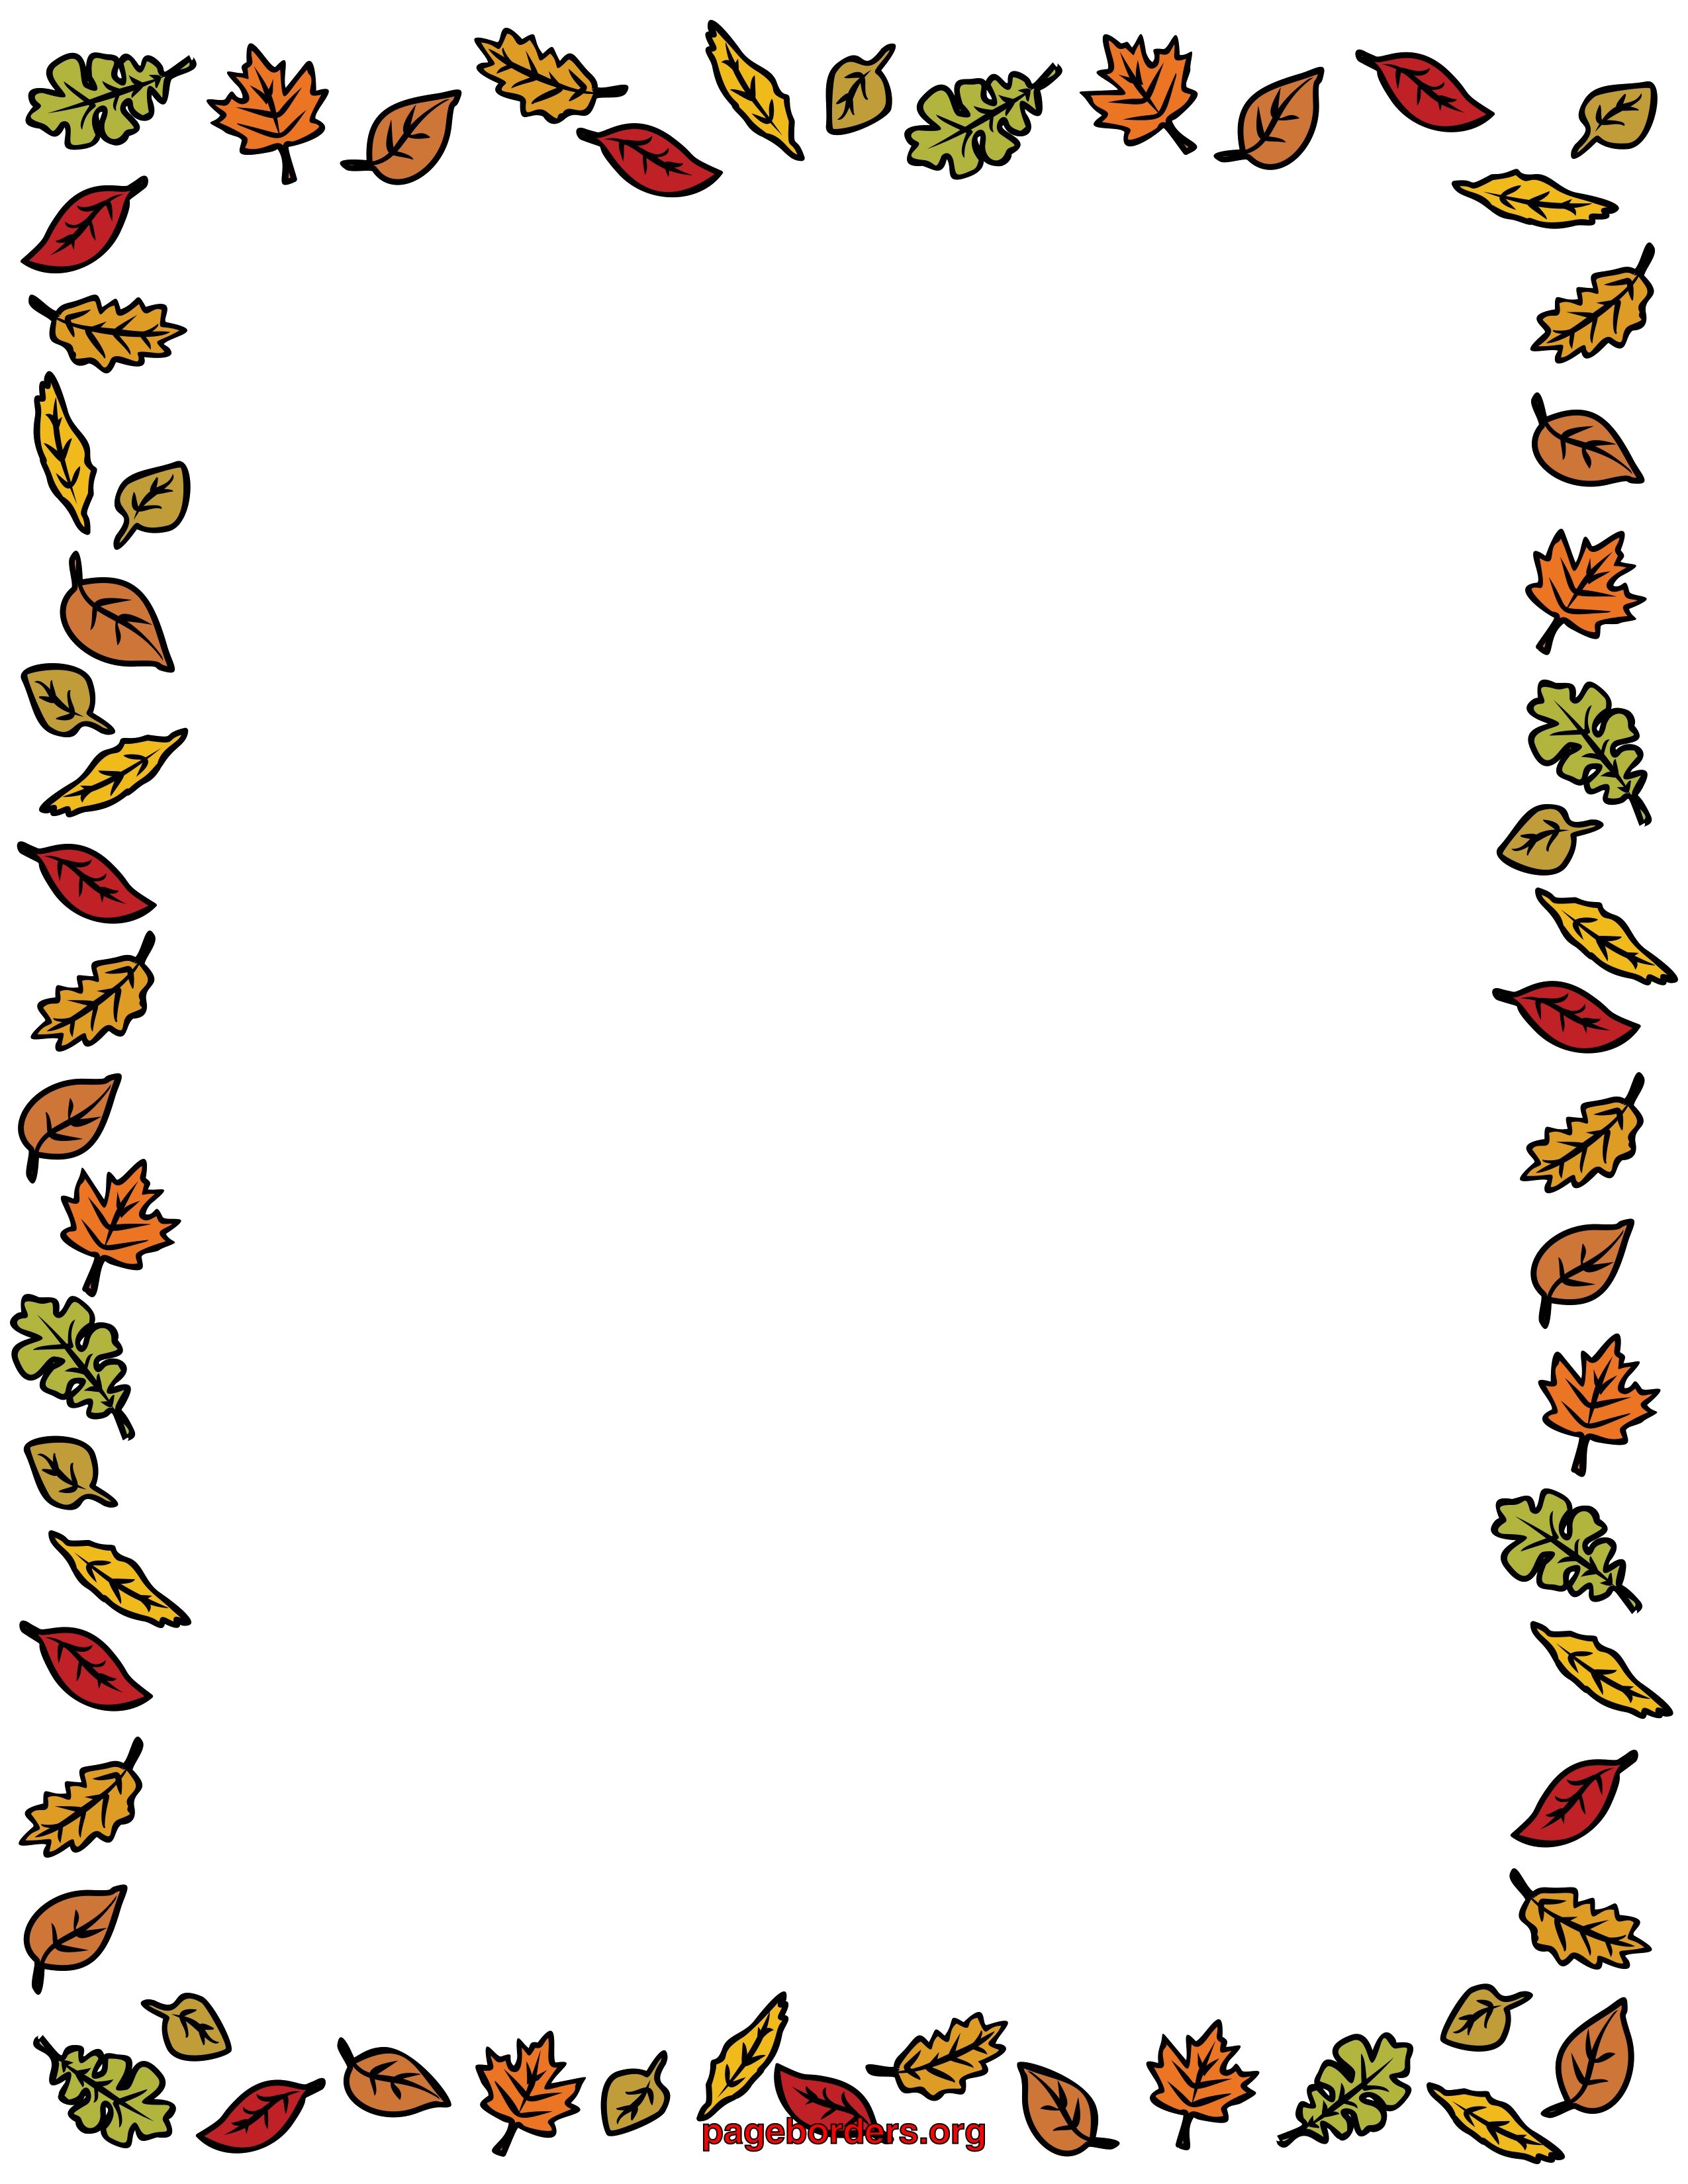 Download PNG image - Fall Border PNG Clipart 